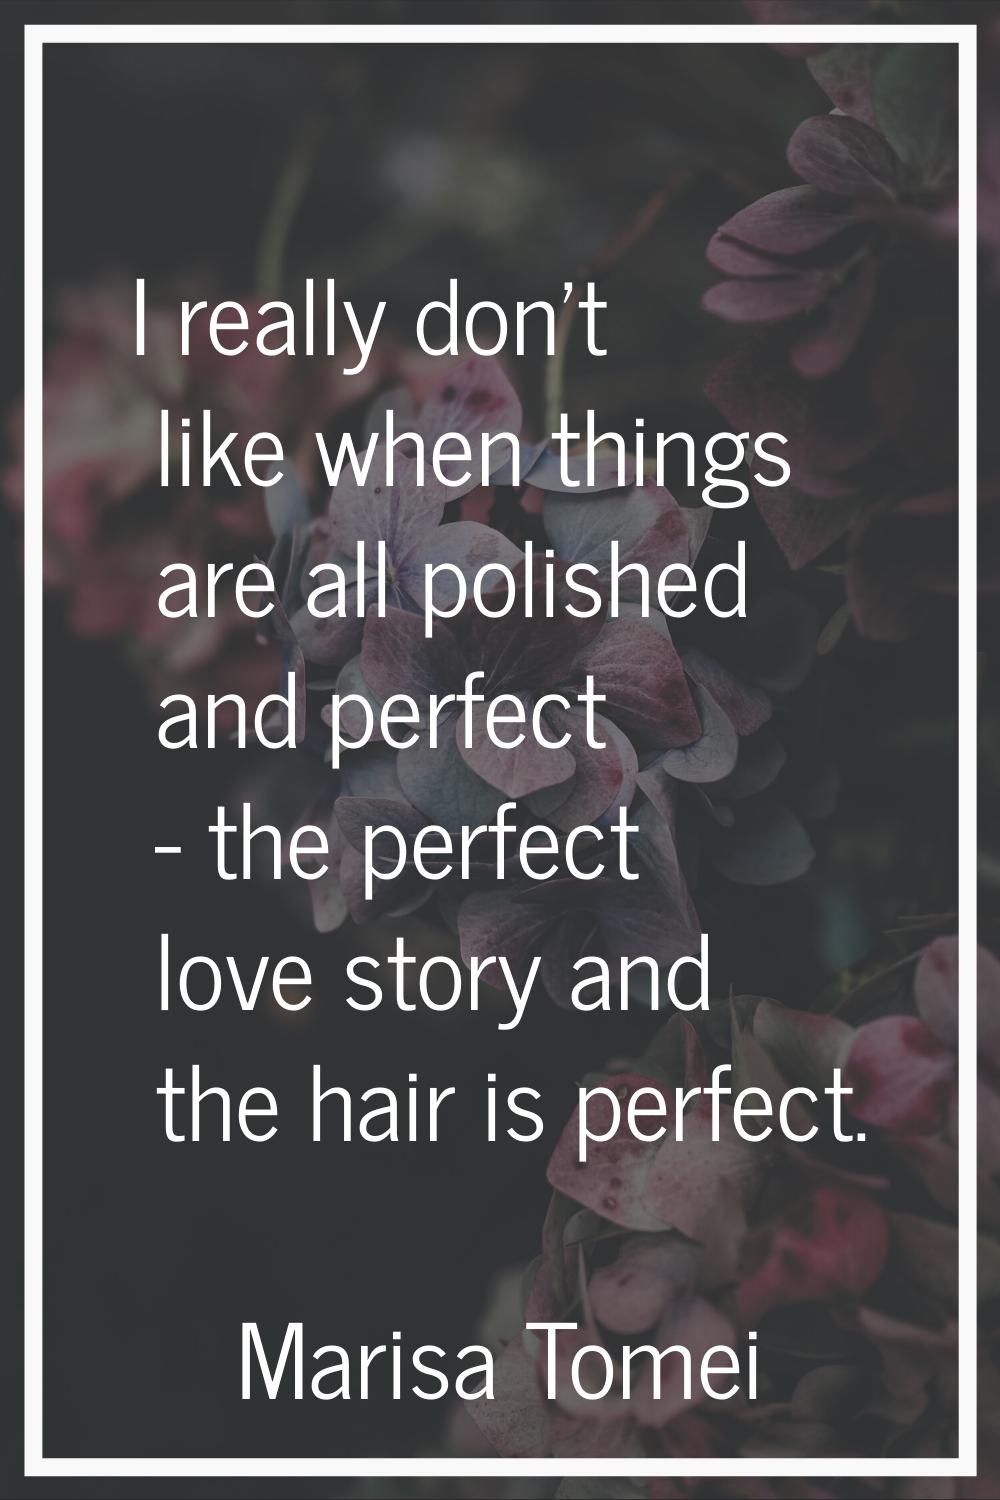 I really don't like when things are all polished and perfect - the perfect love story and the hair 